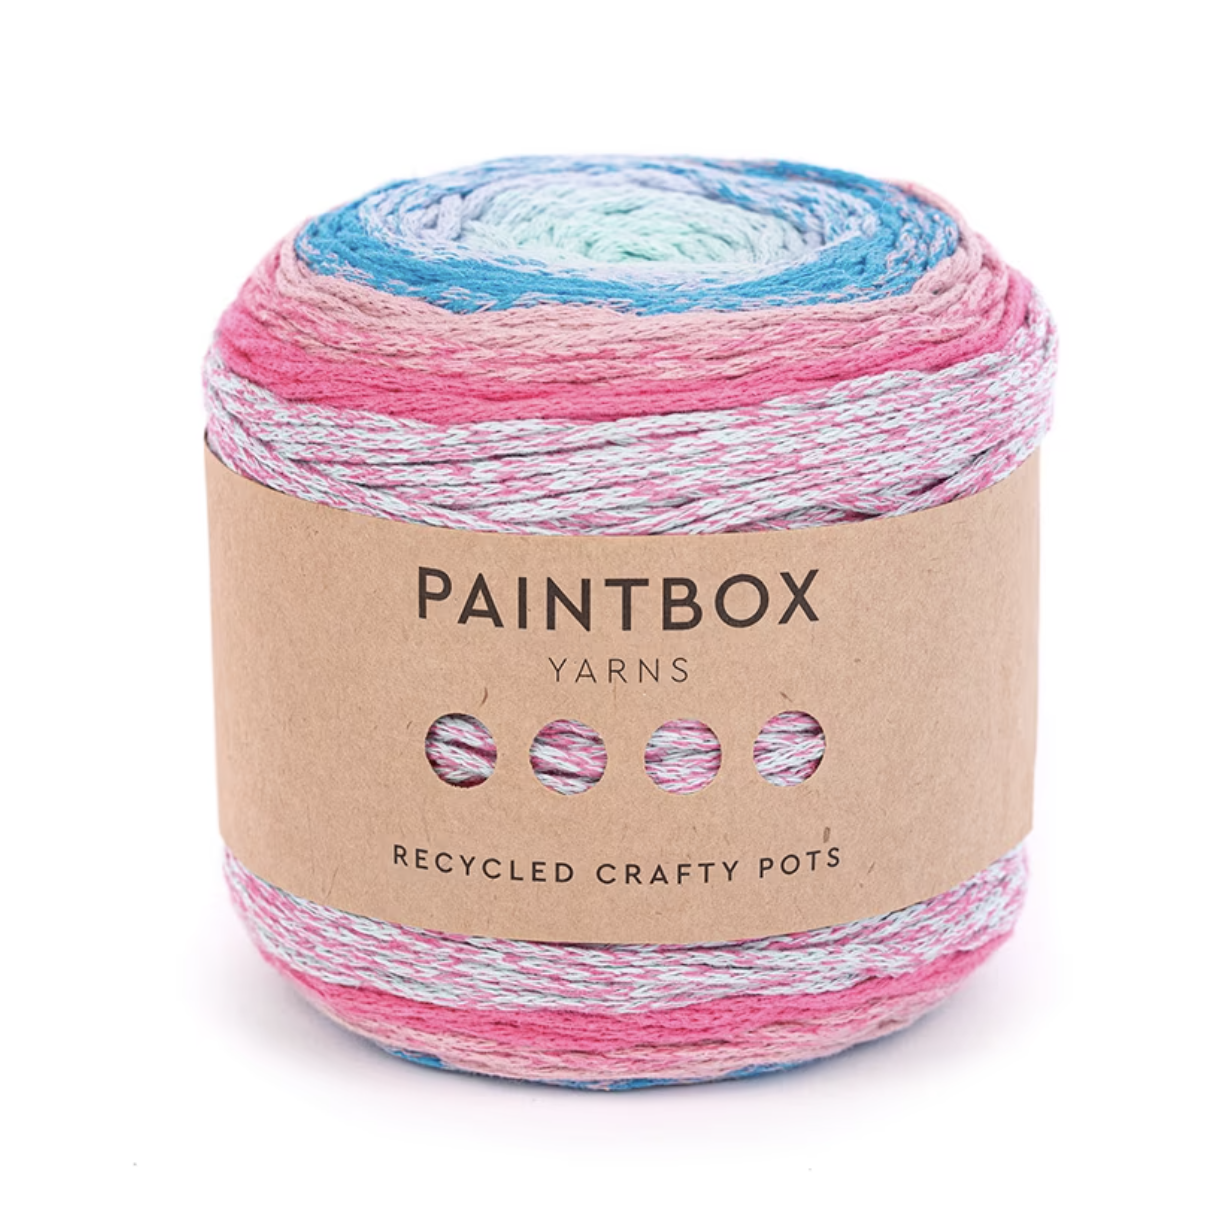 Paintbox Yarns Recycled Crafty Pots (250g) – Paintbox Yarns